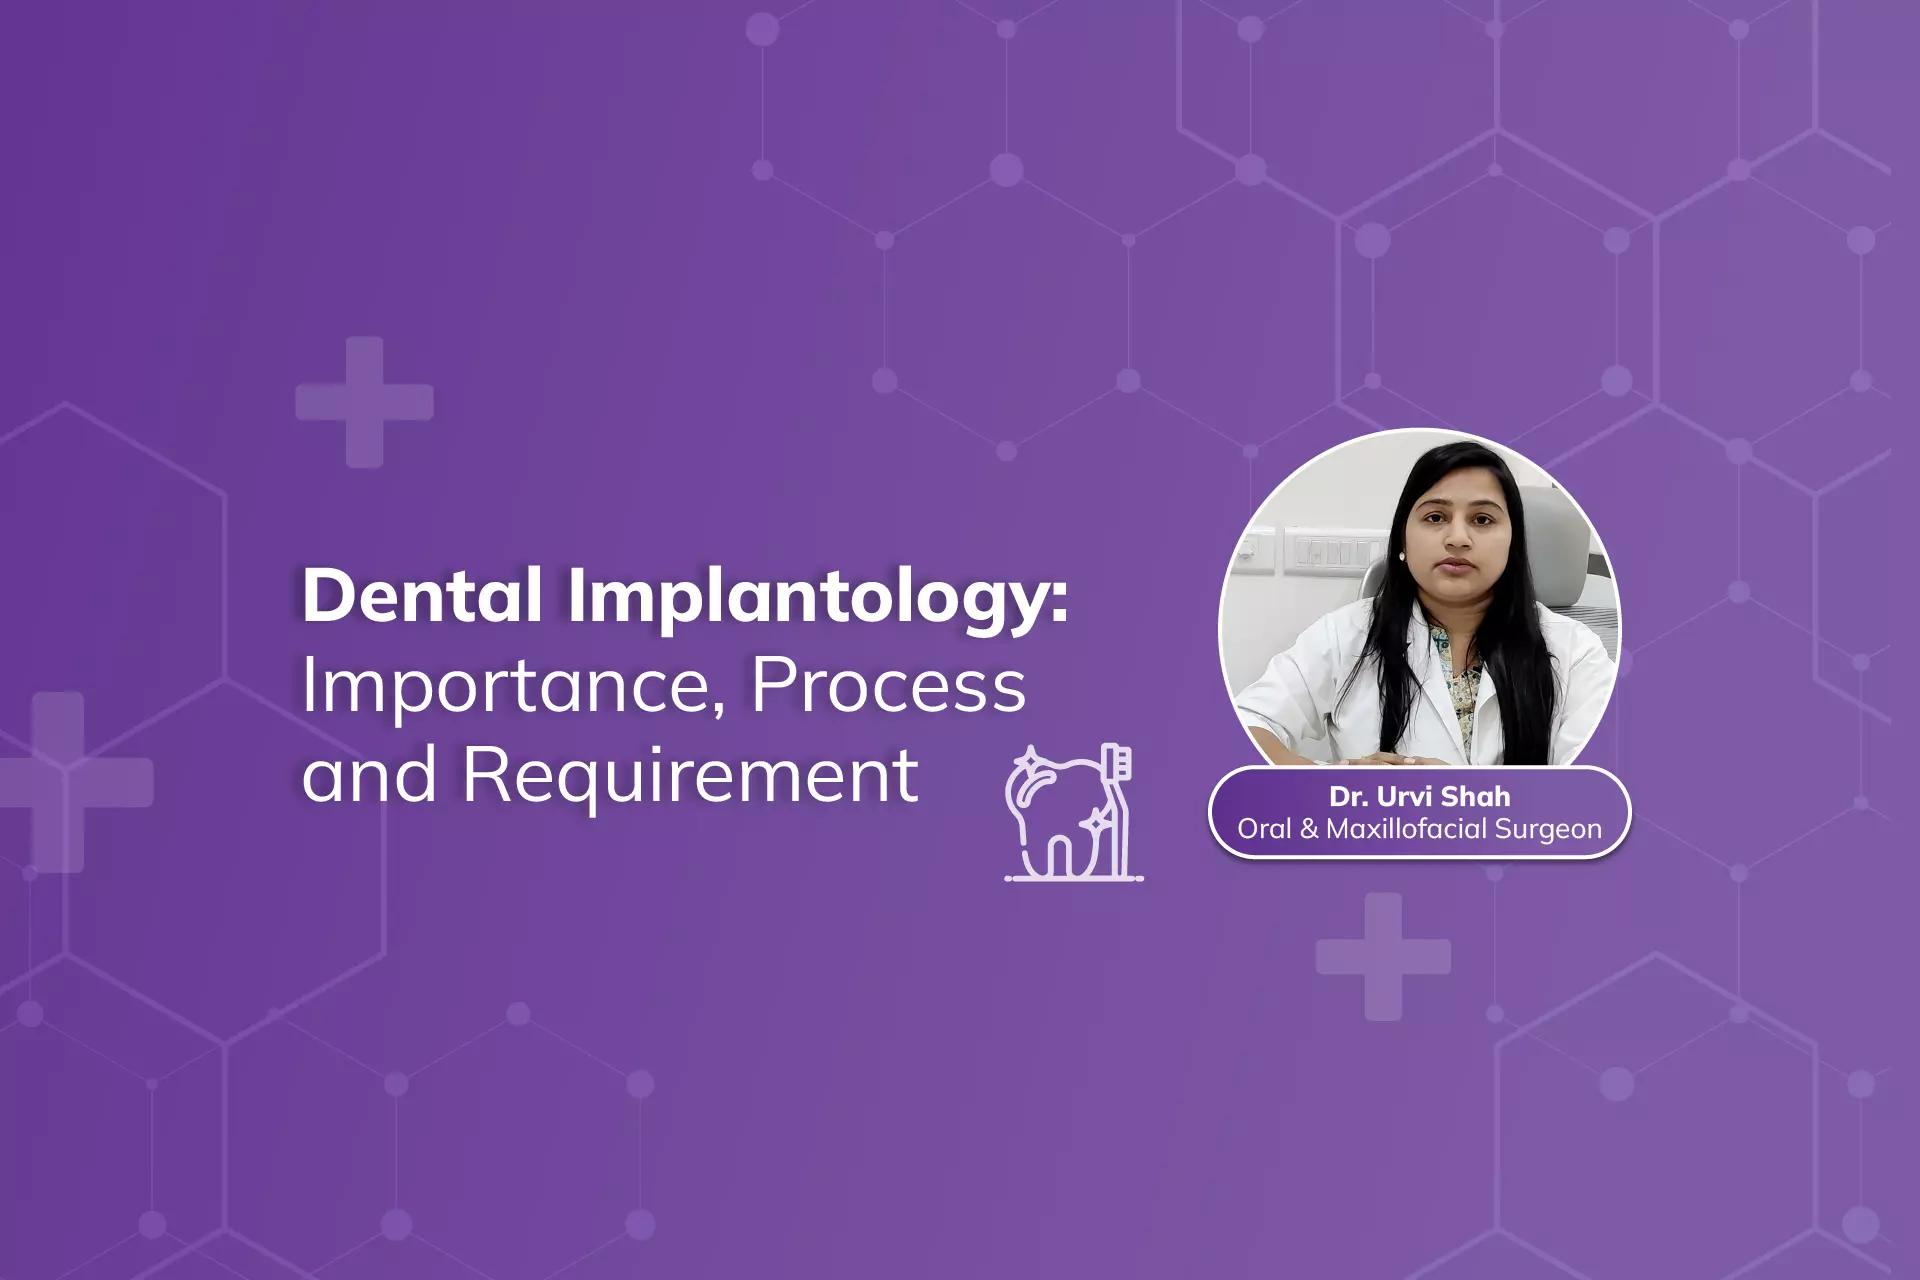 Dental Implantology: Importance and Process by Dr. Urvi Shah